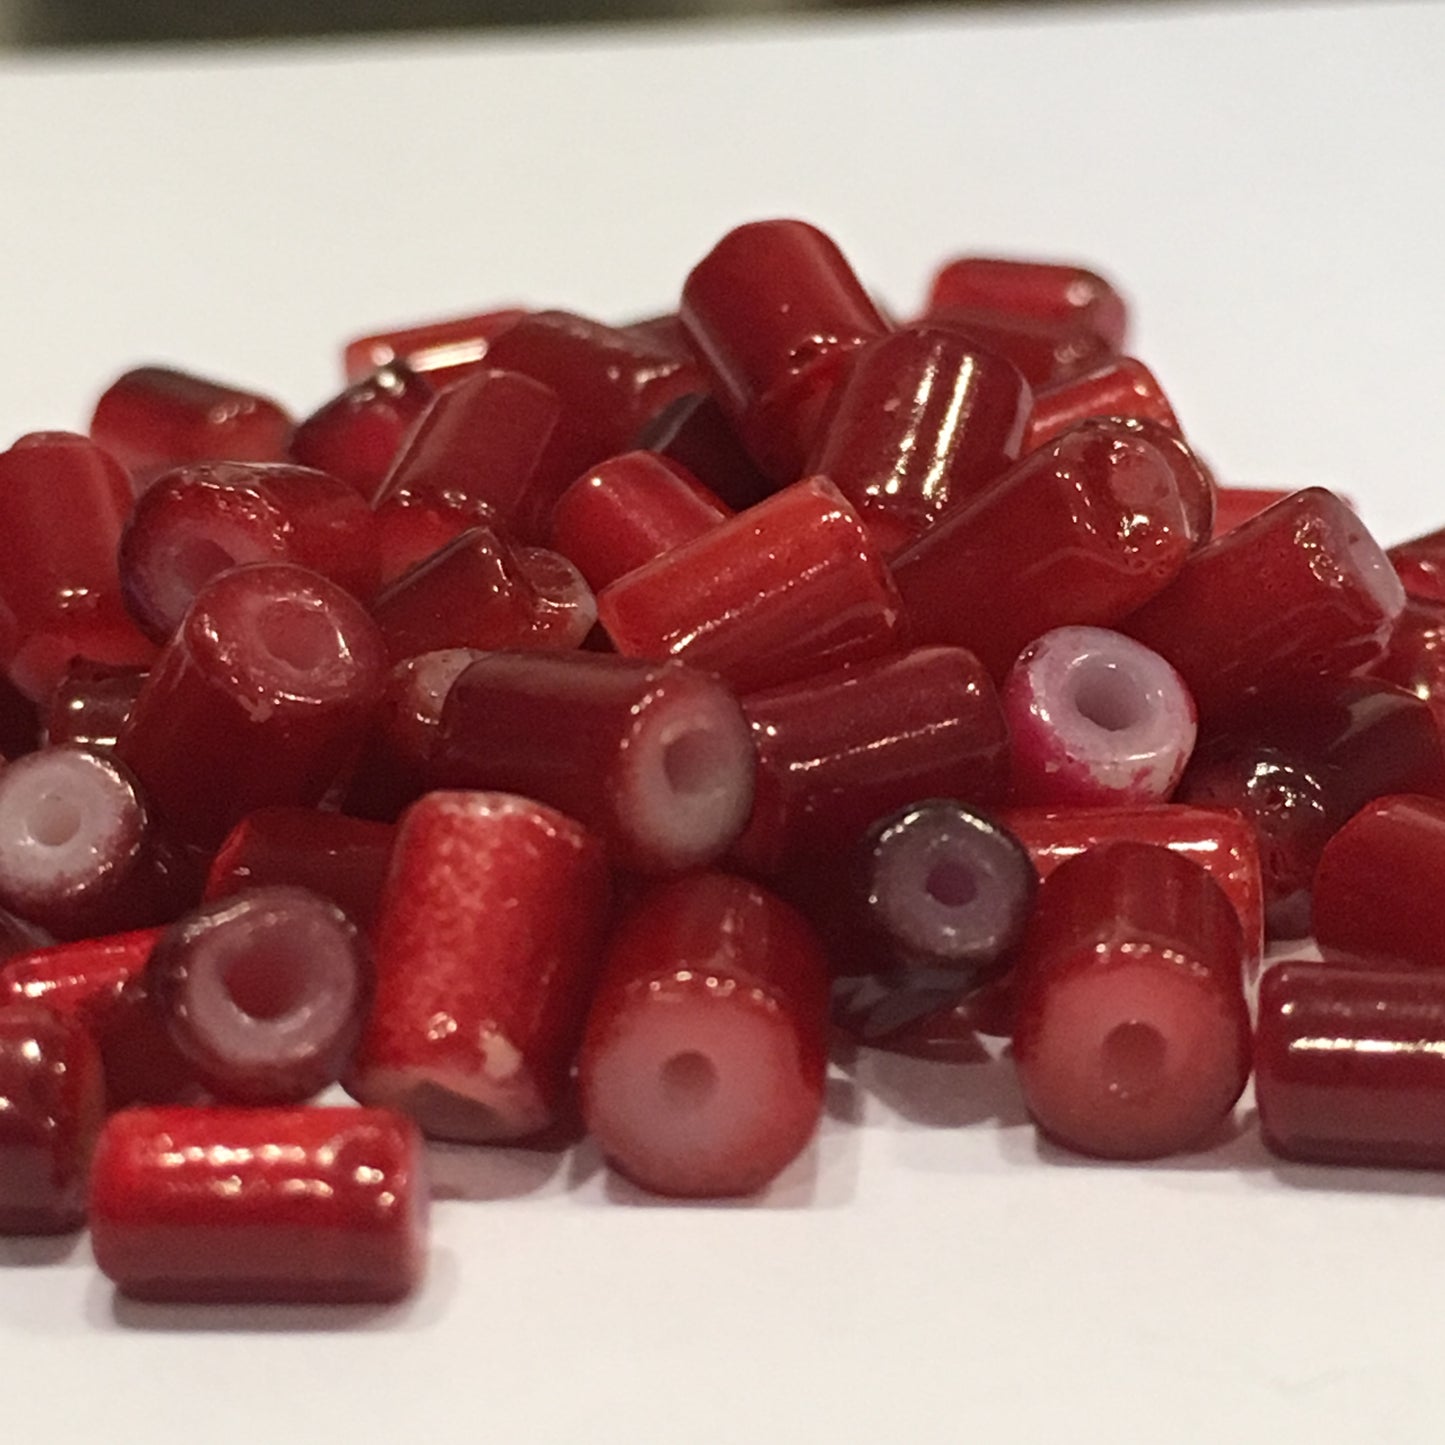 Red Painted Glass Tube Beads, Average Size 8 x 5 mm, 93 Beads